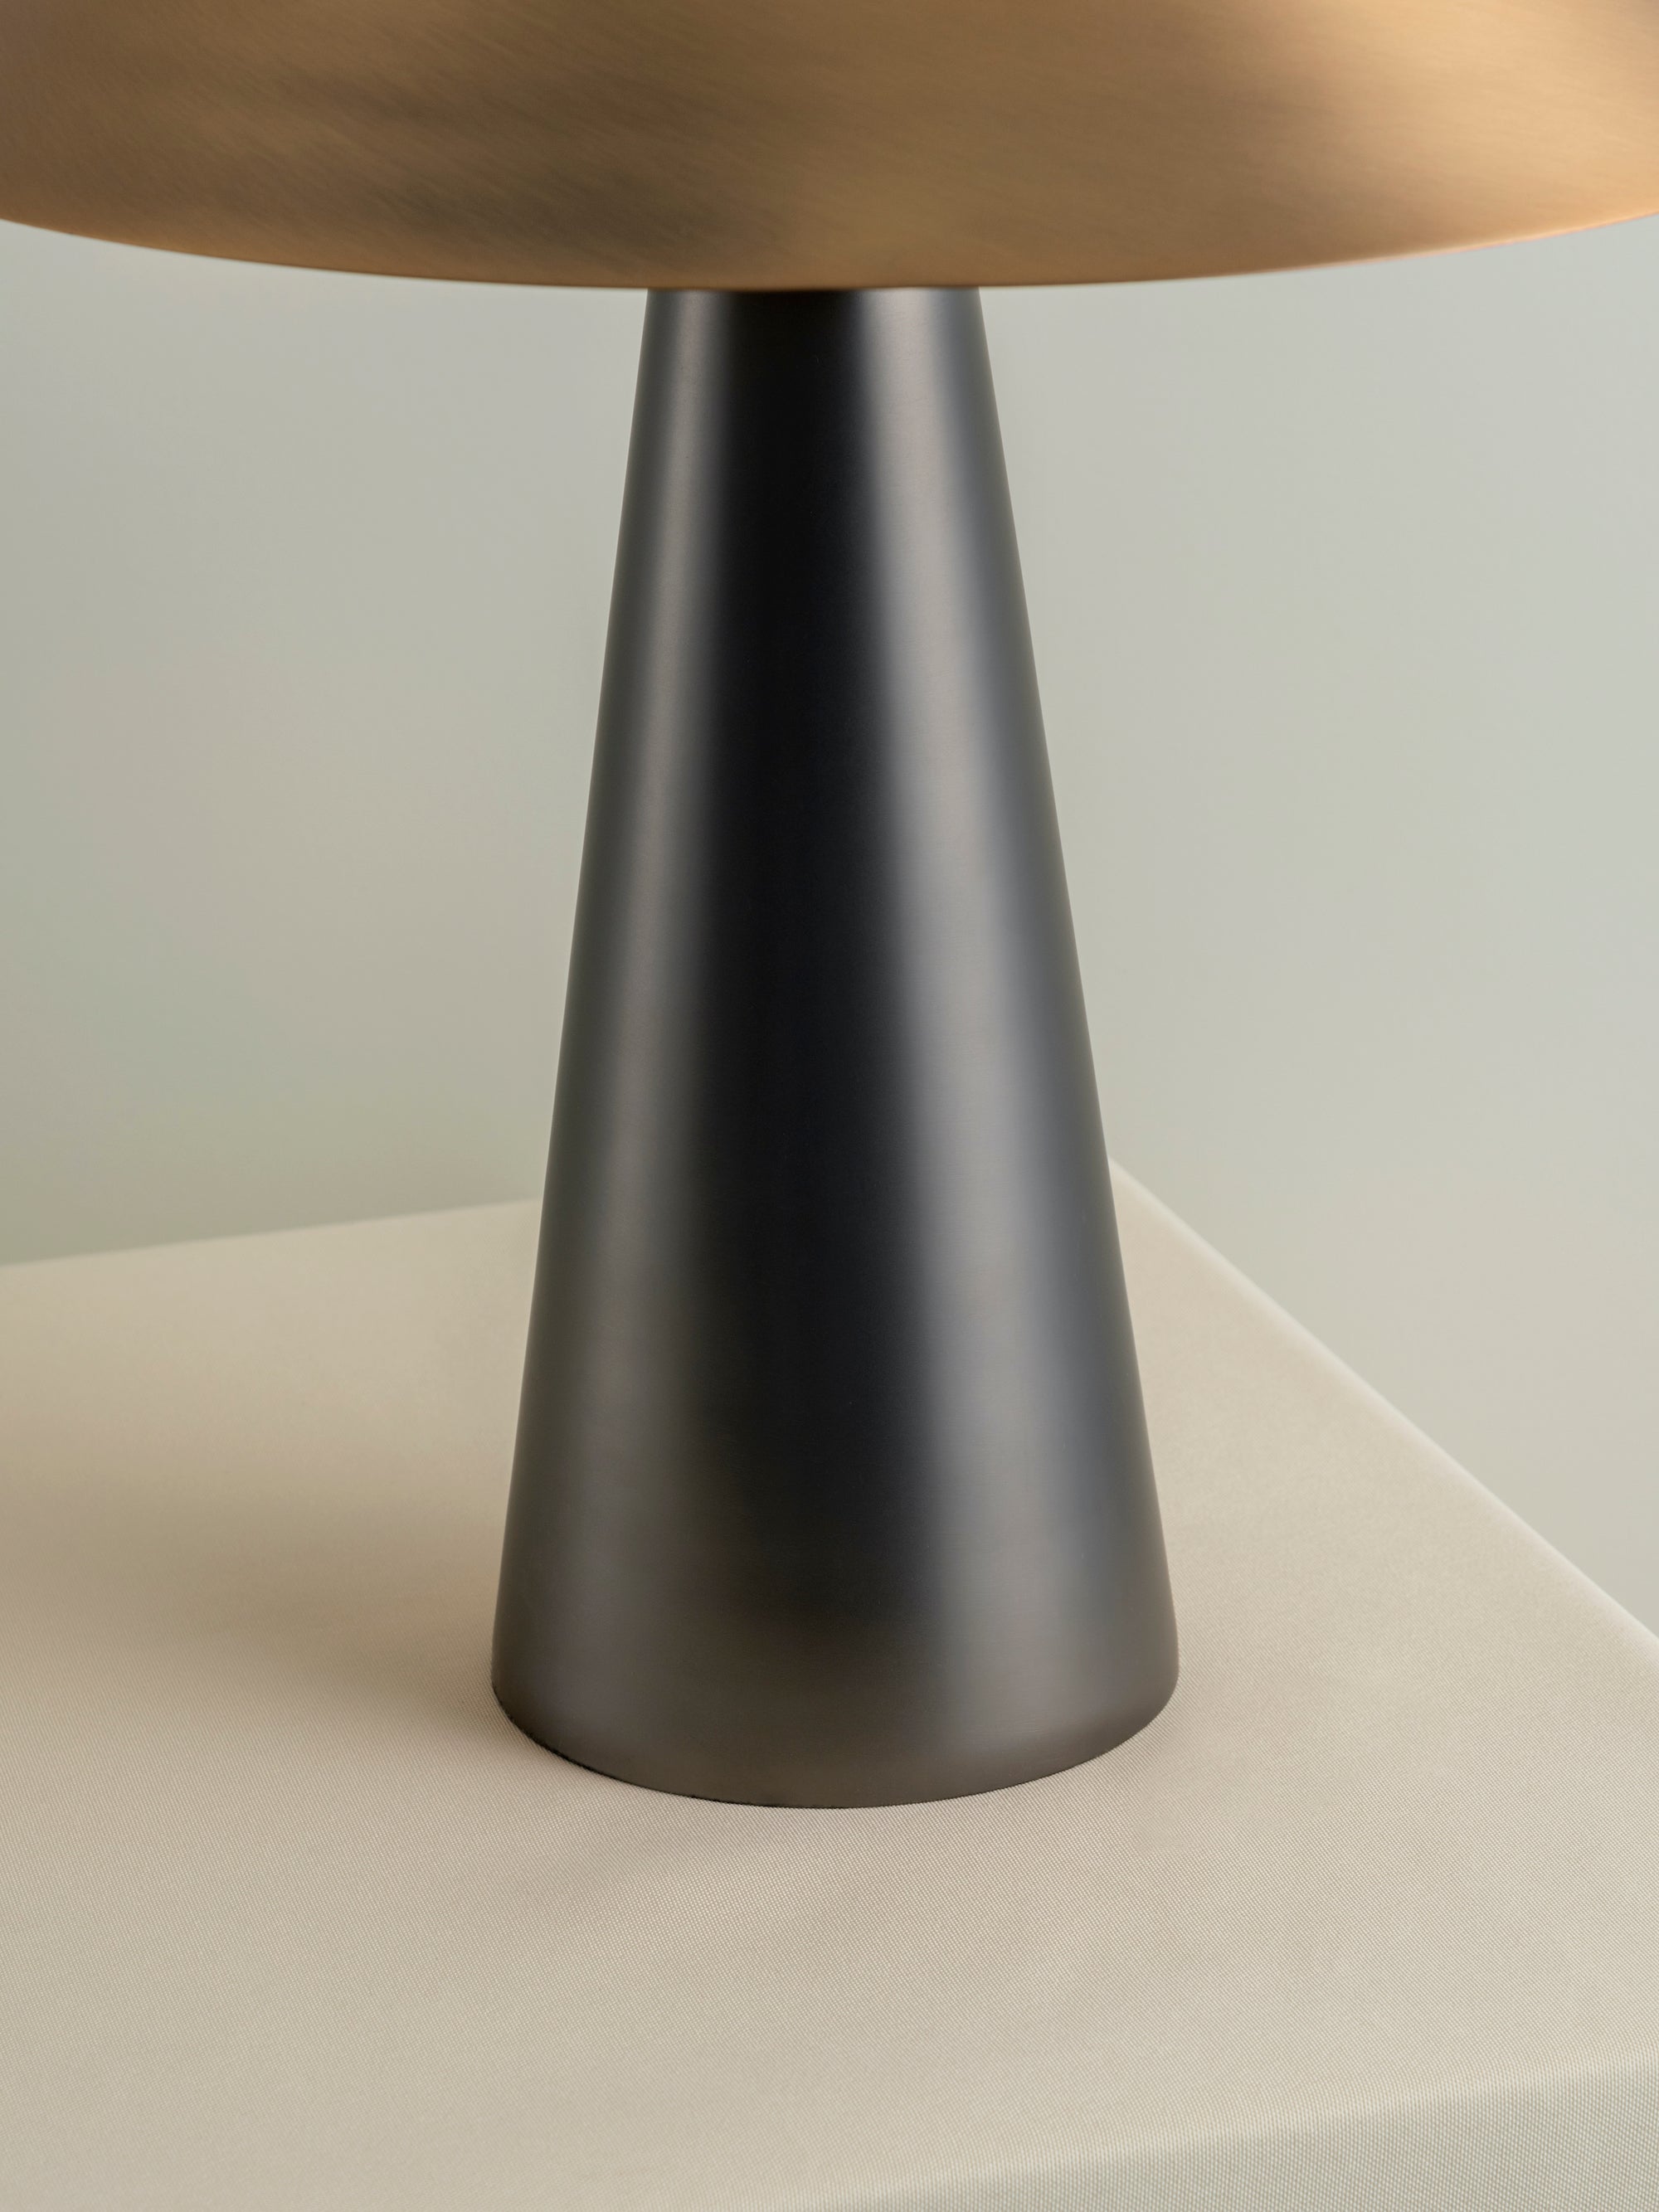 Orta - 1 light antique silver and burnished brass cone table lamp | Table Lamp | Lights & Lamps Inc | Modern Affordable Designer Lighting | USA